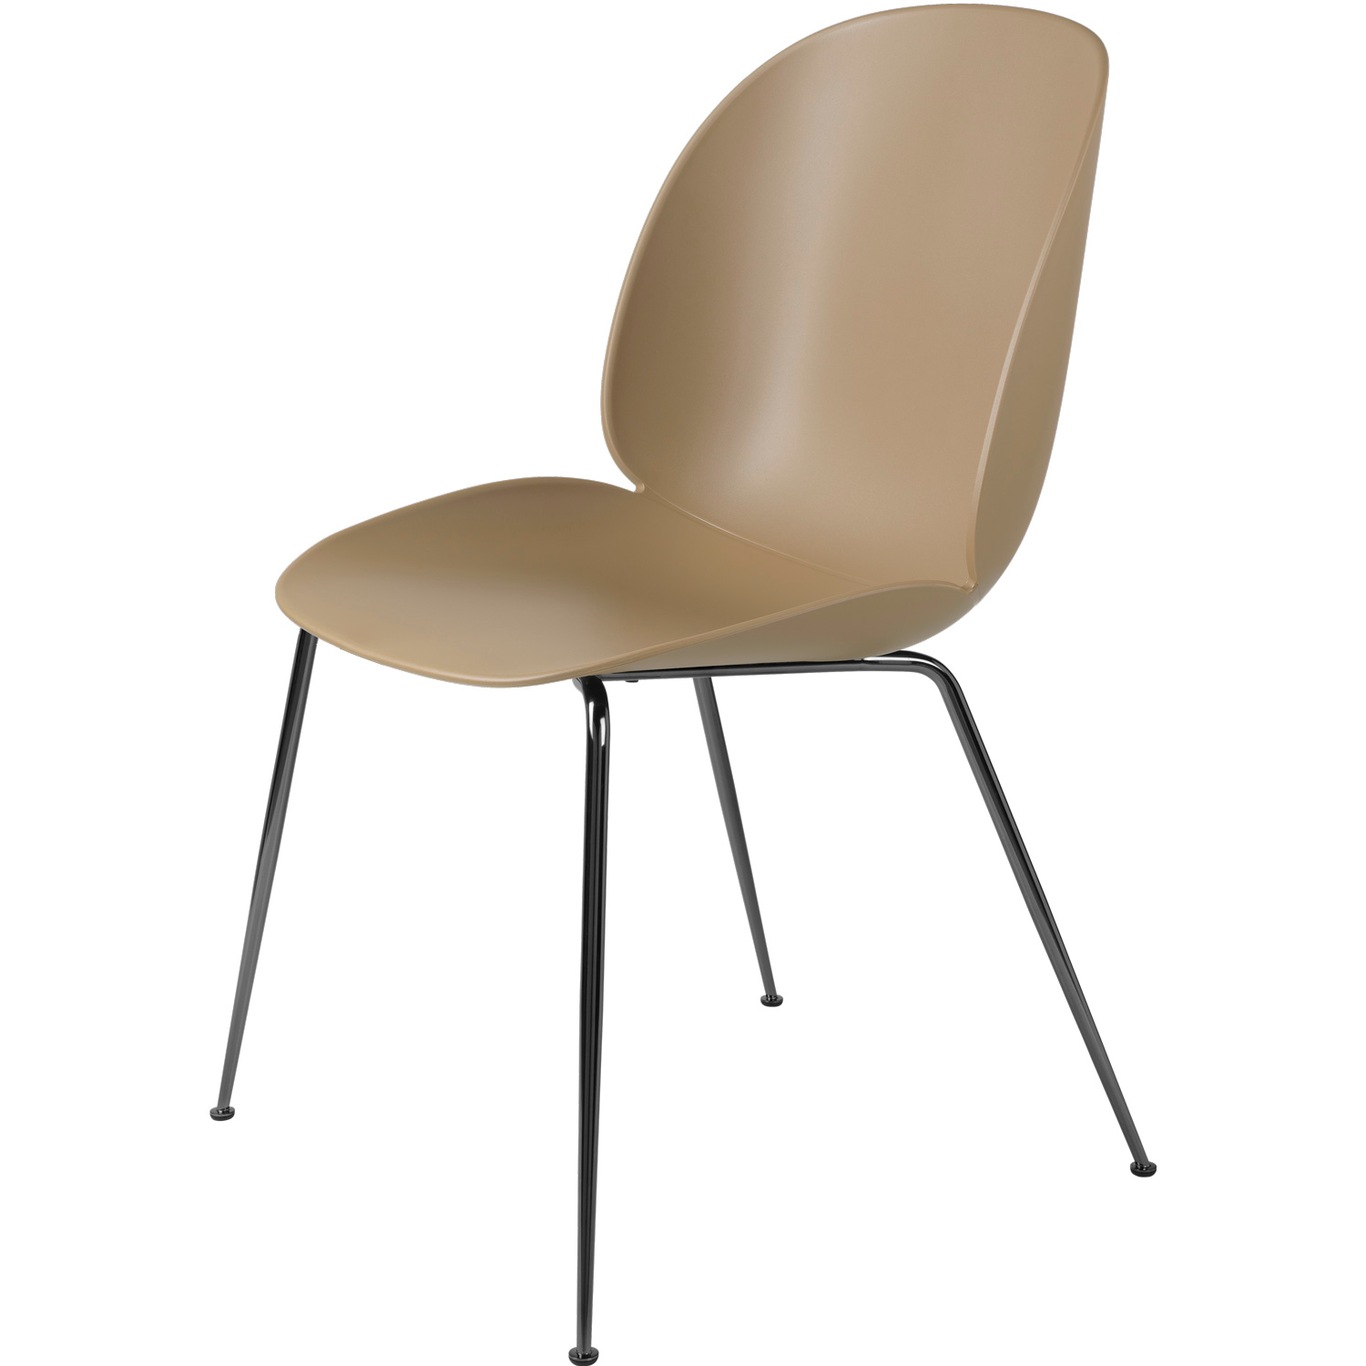 Beetle Dining Chair Unupholstered, Conic Base Black Chromed, Pebble Brown